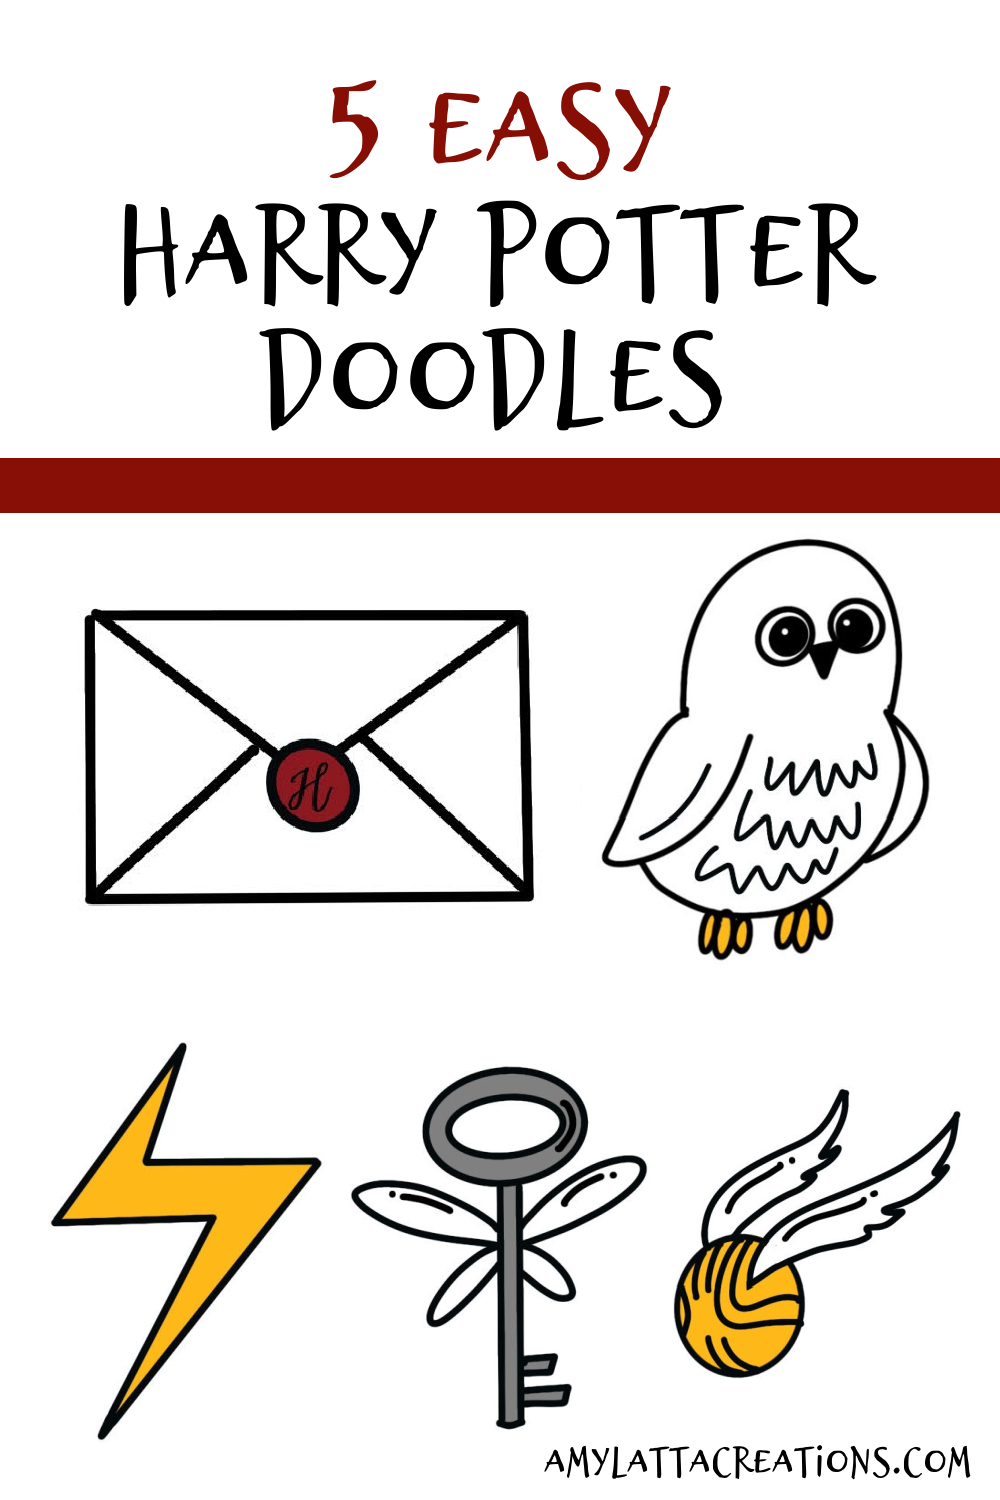 My Harry Potter drawing